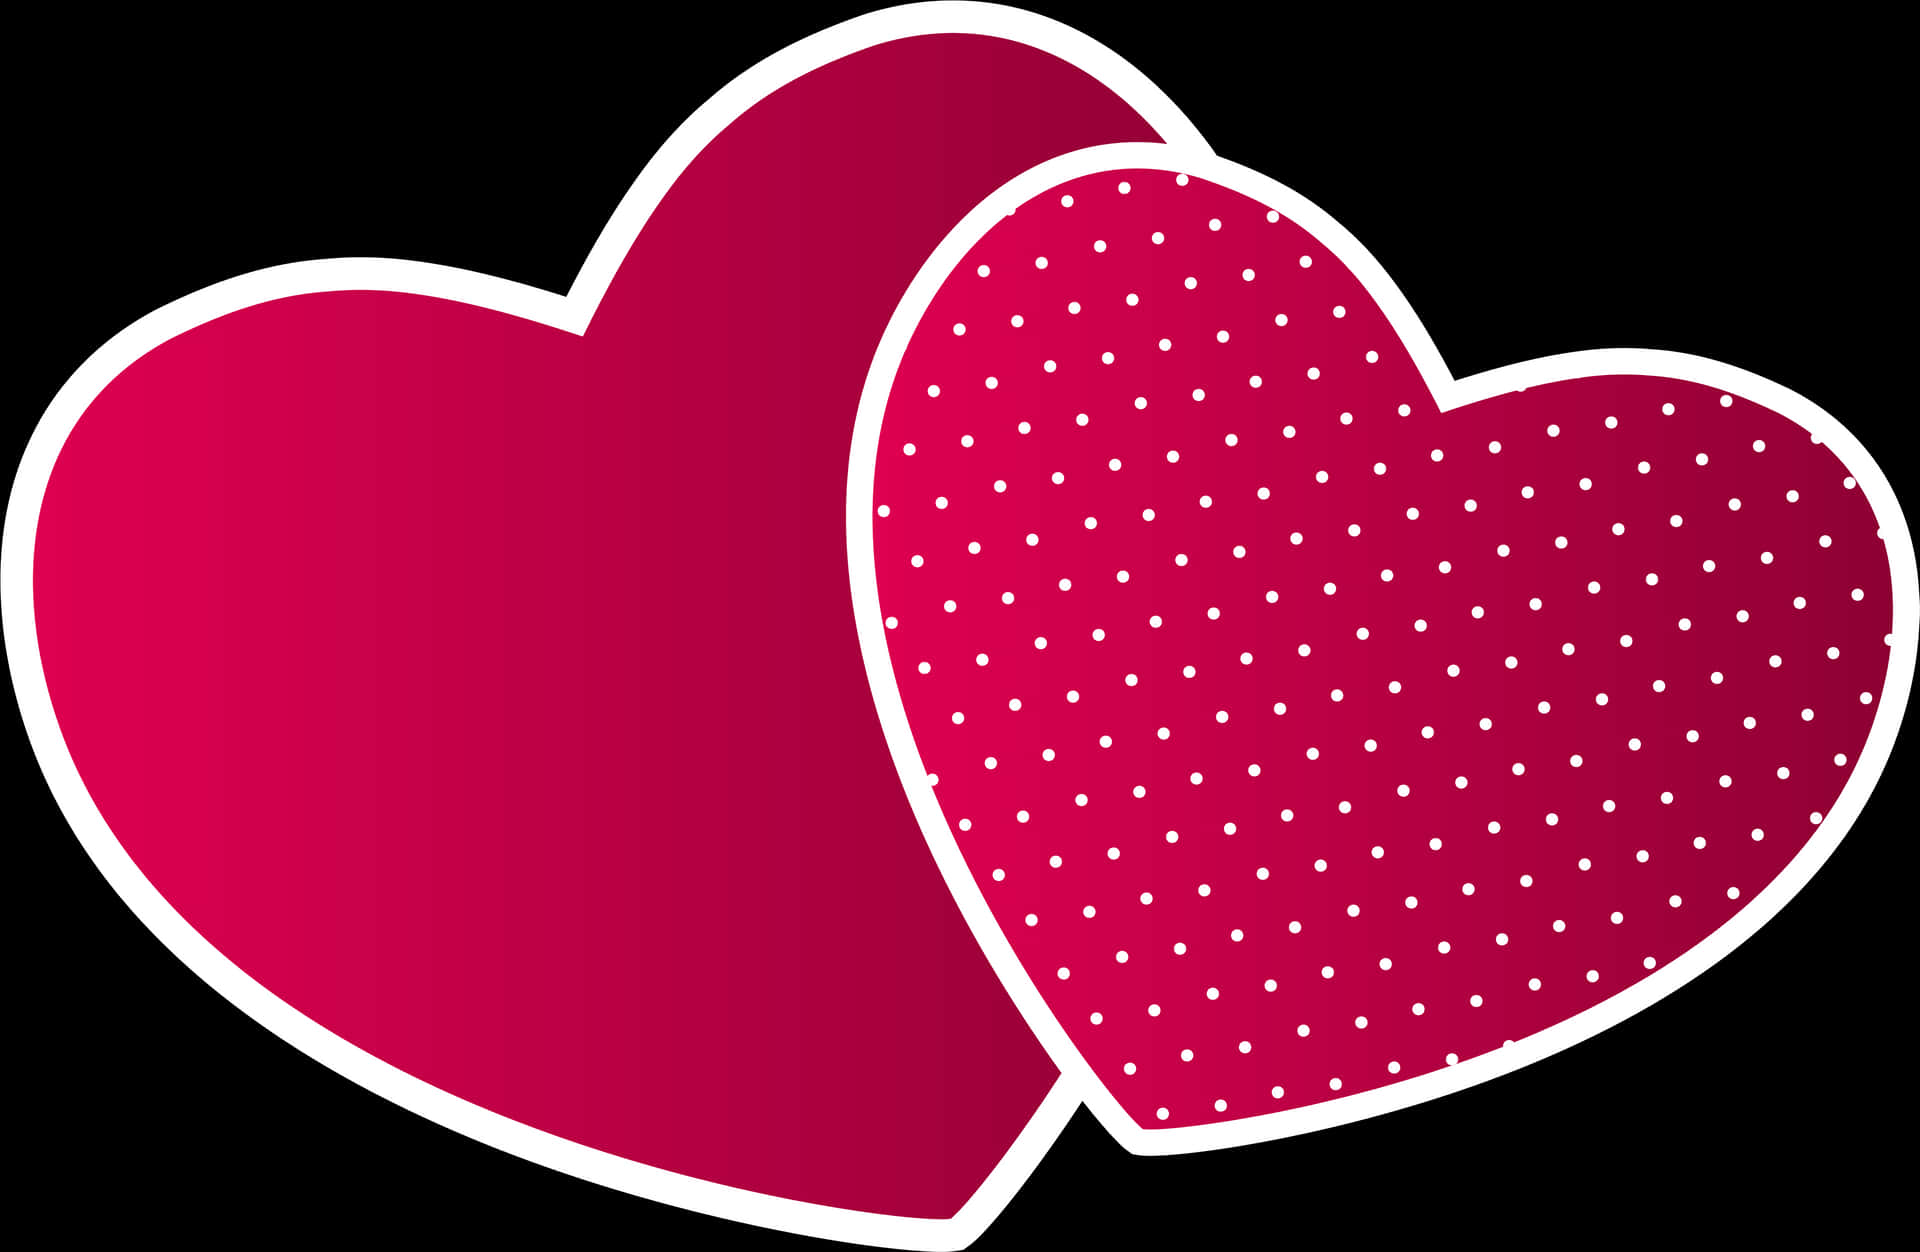 Two Hearts Graphic Design PNG